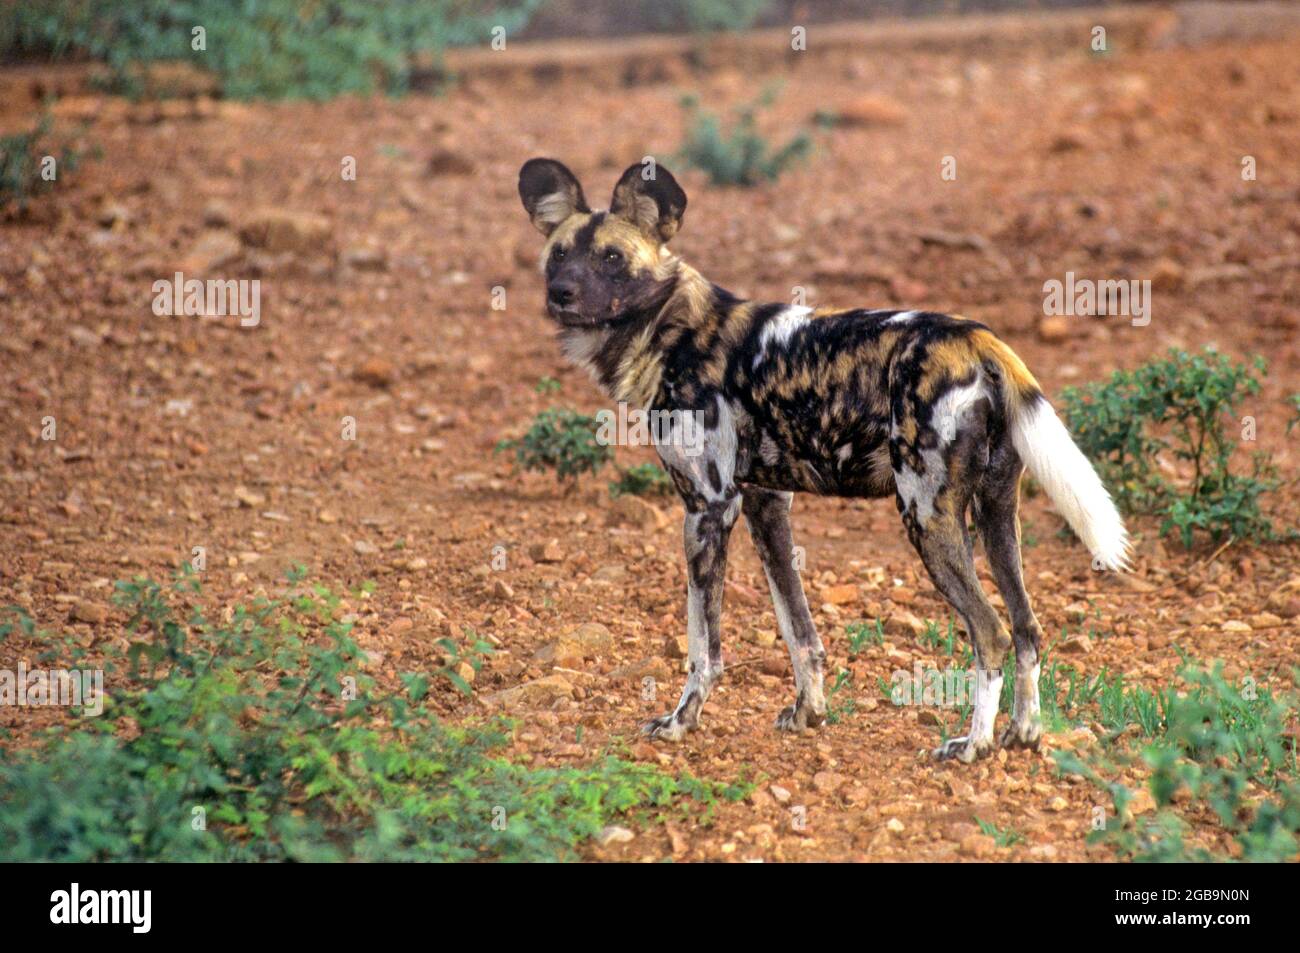 The African wild dog (Lycaon pictus) is a canine which is a native species to sub-Saharan Africa. It is the largest wild canine in Africa, and the onl Stock Photo